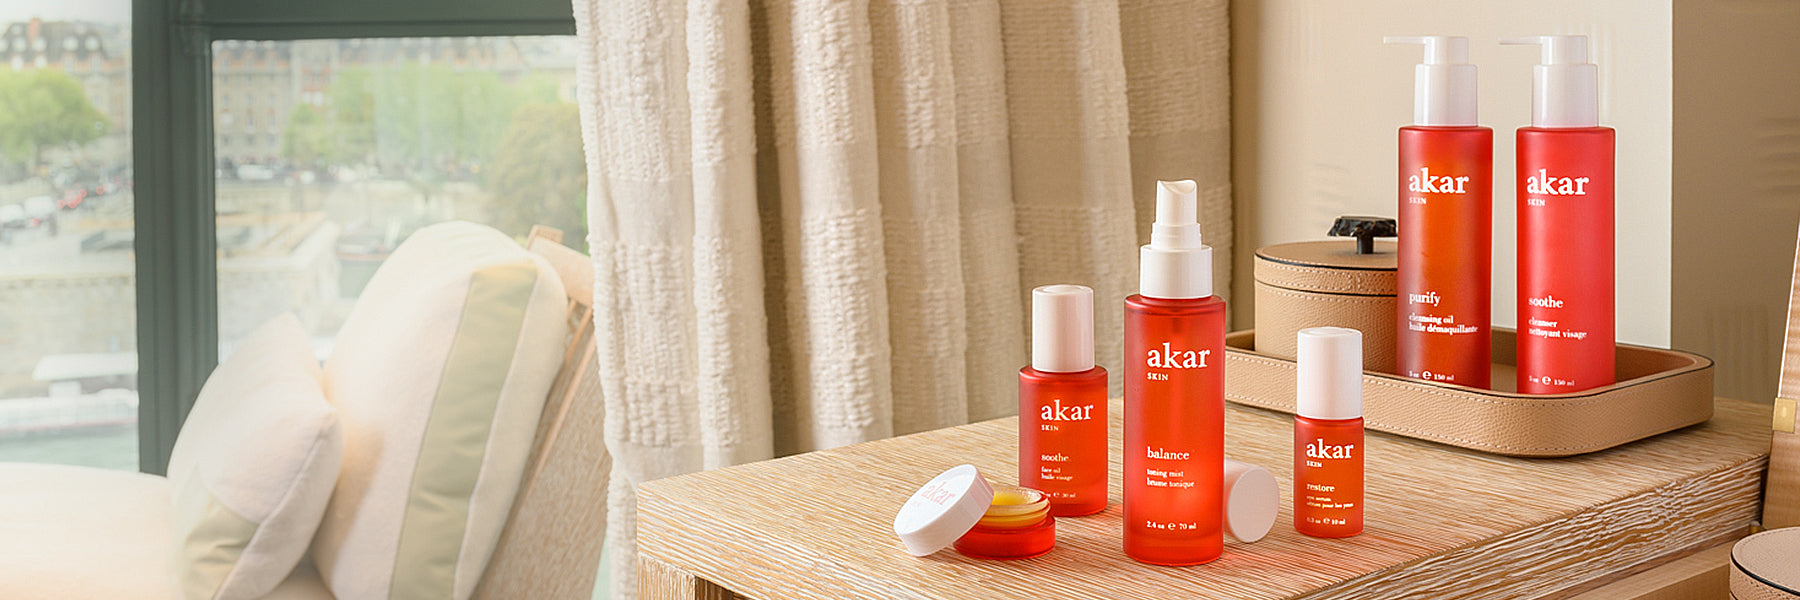 Akar skin, clean, green, beauty, luxury, skincare, Soothe Face Oil, Purify Cleansing Oil, Soothe Cleanser, Balance Toning Mist, Restore Eye Serum, Pure Lip Restoration, Tibetan inspired